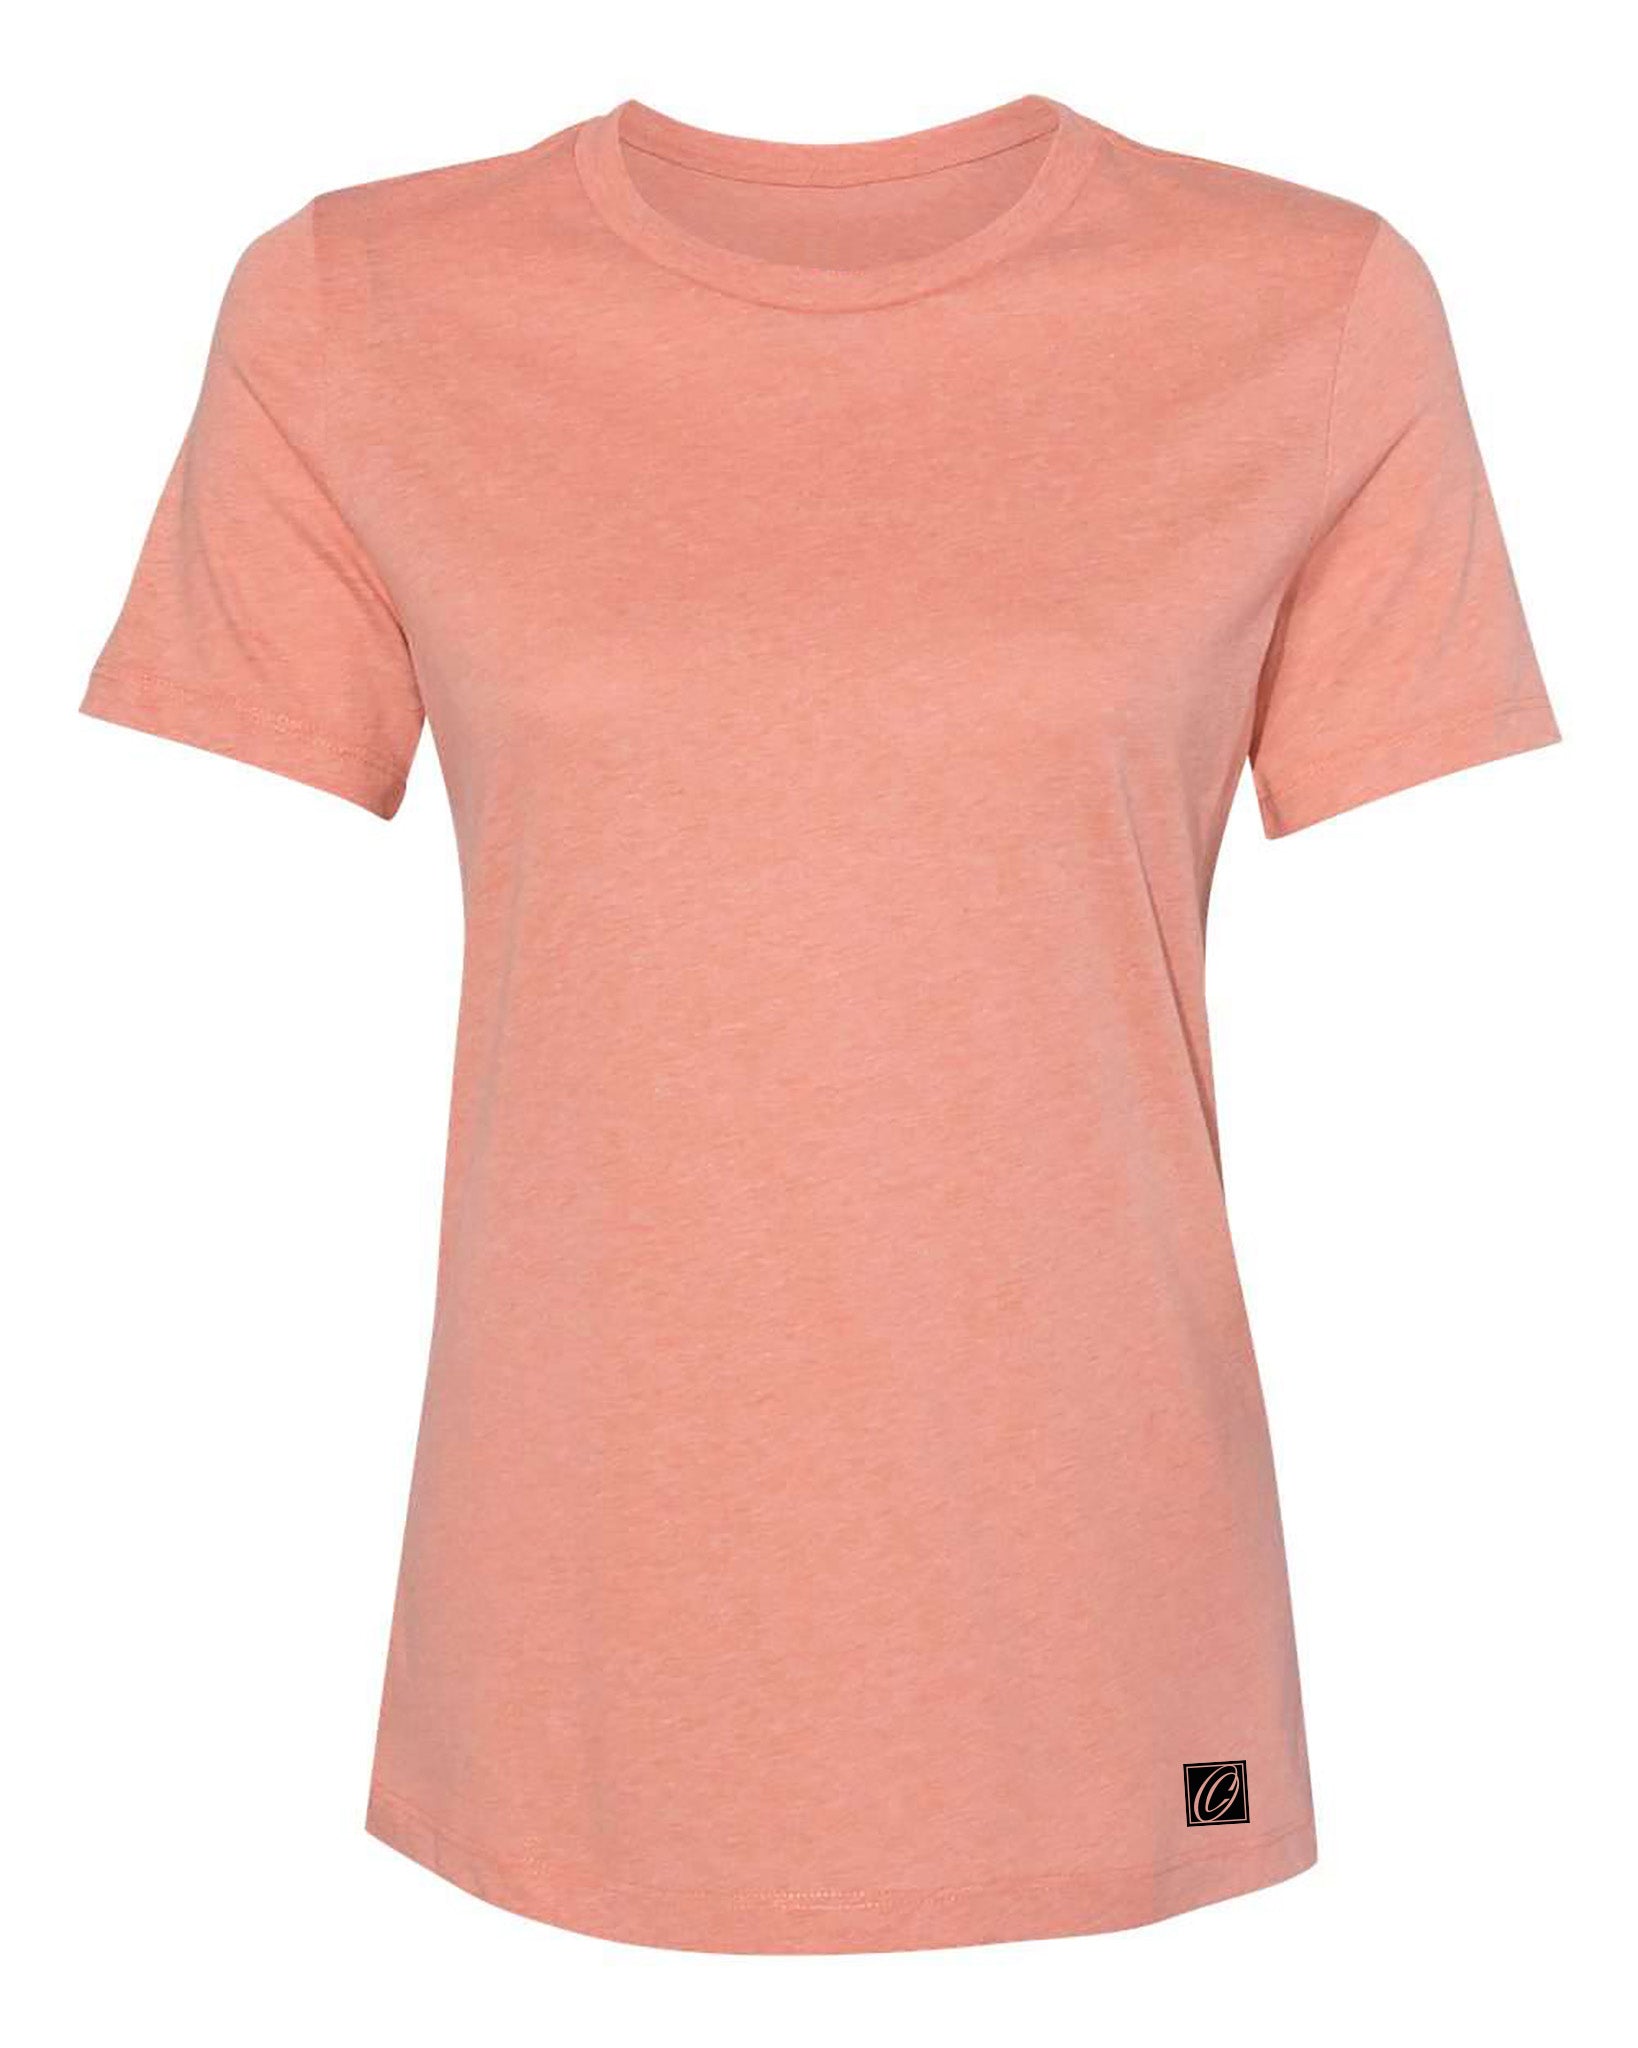 Bella Canvas Ladies Relaxed Fit Heather CVC Crew Neck Short Sleeve Tee - Red/Pink/Yellow/Orange/Tan